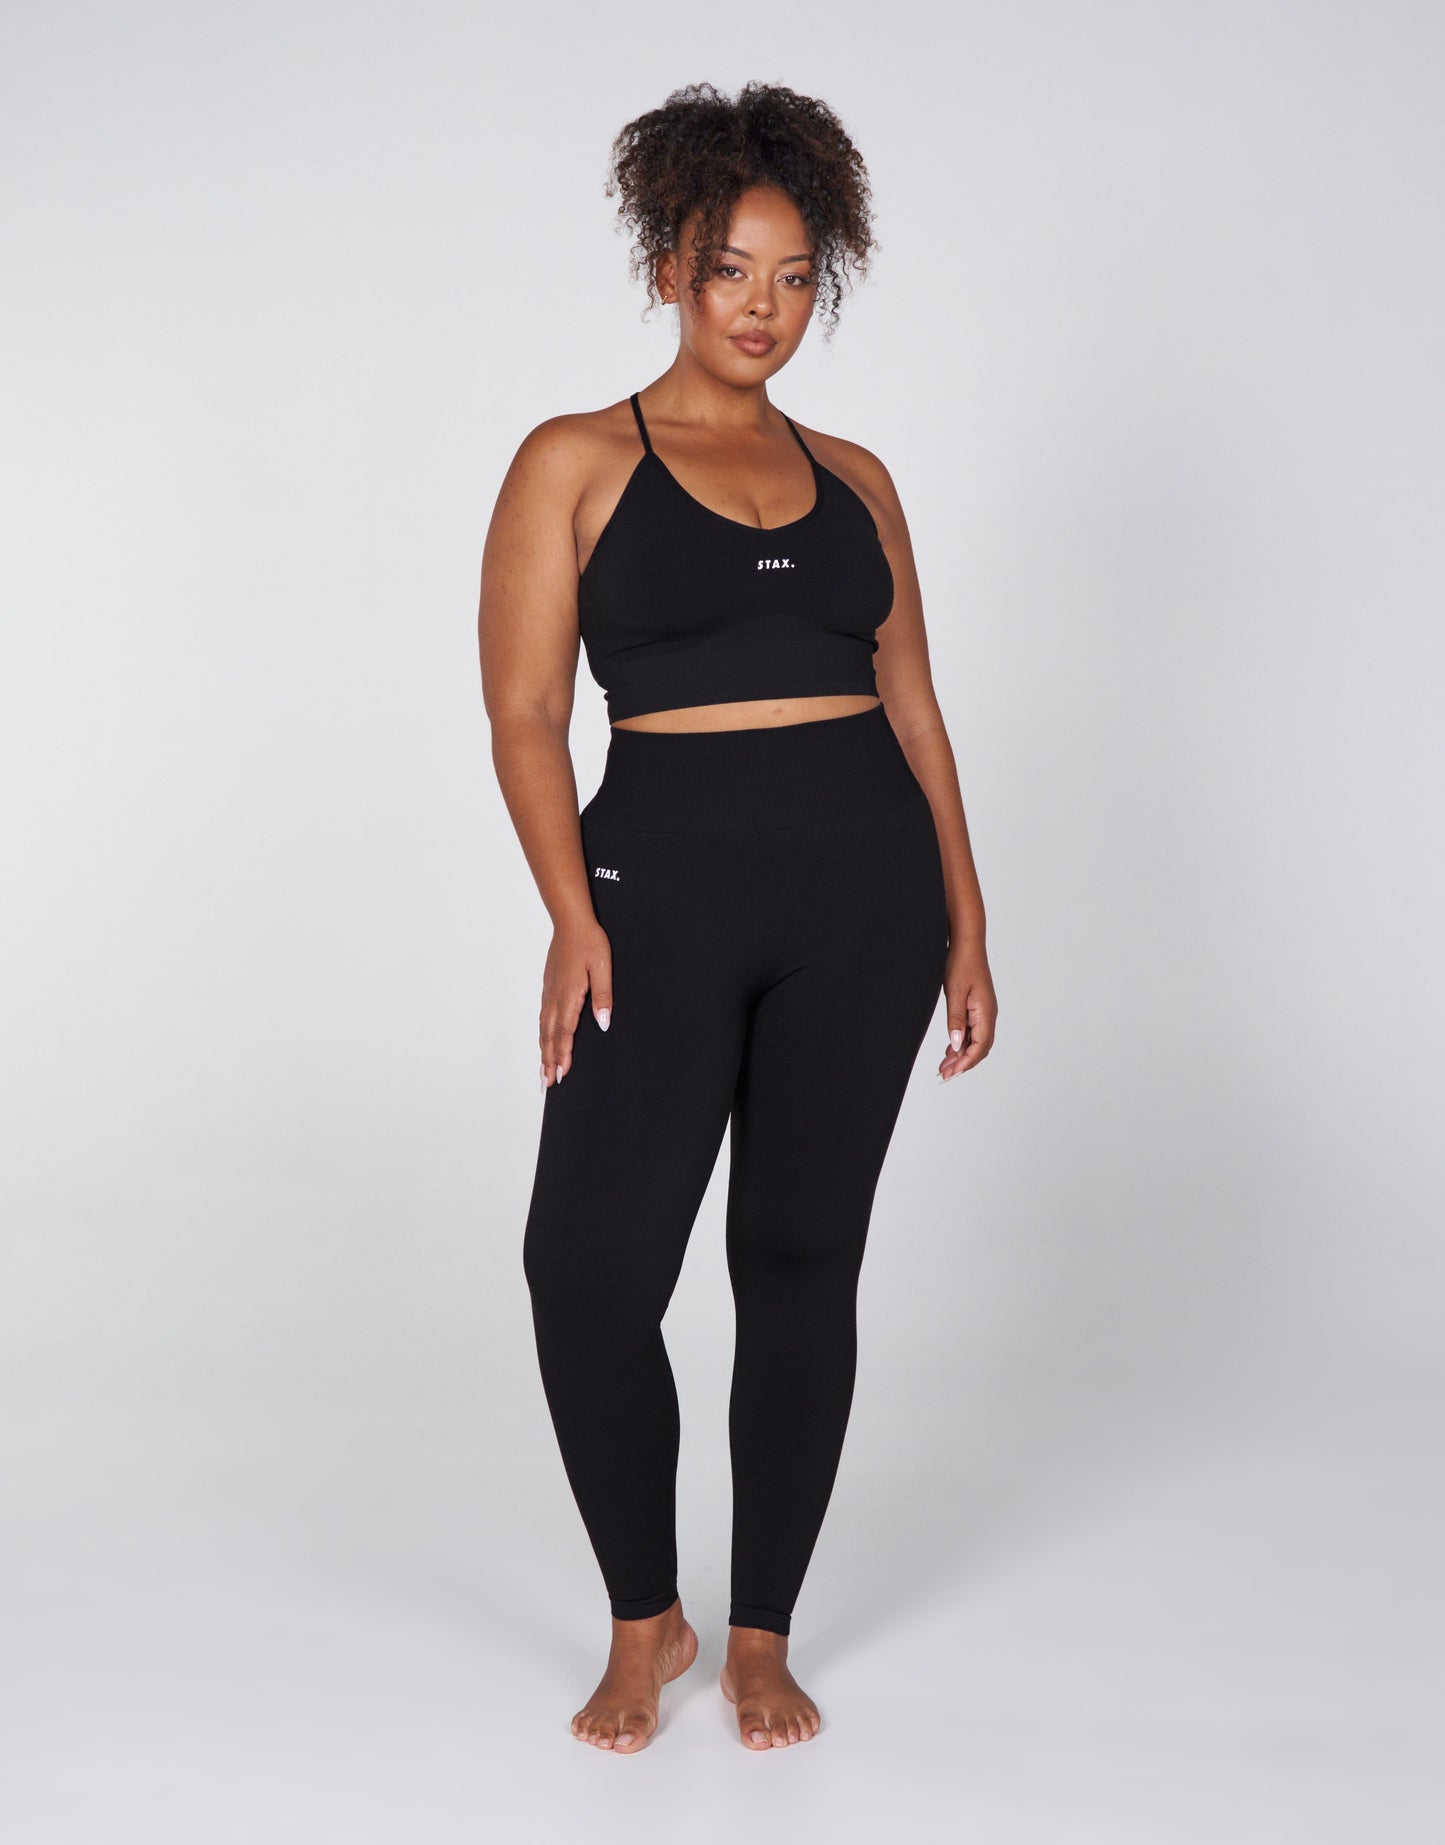 STAX. PSF Strappy Crop - Astro